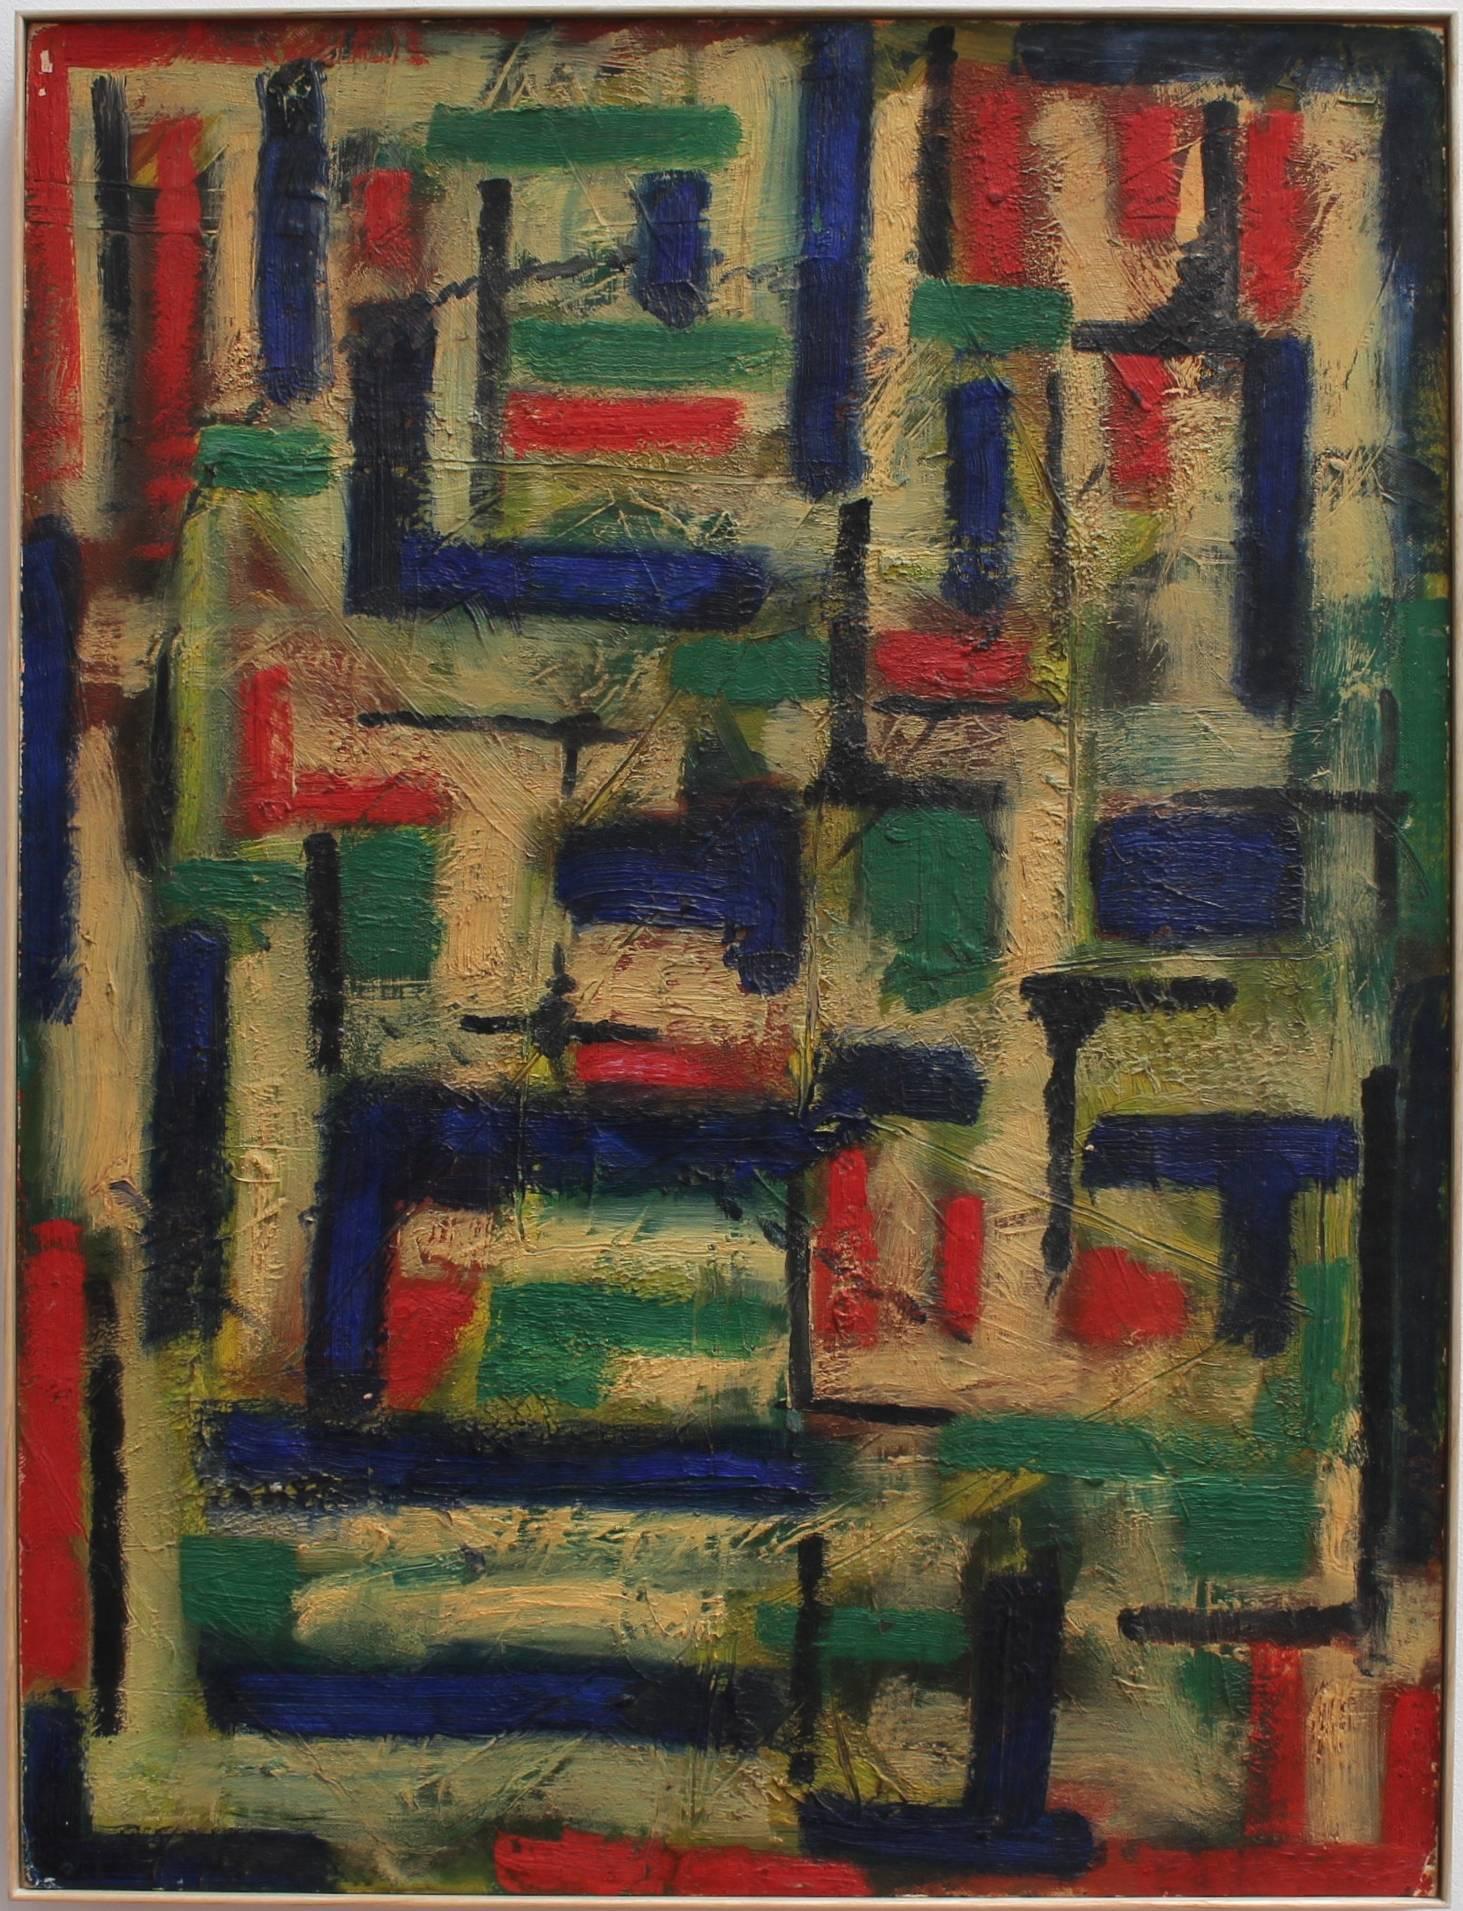 'Colours in Abstract' (1953) by Meunier de Risset, most likely, French. Oil on board. For the viewer, there is a sense of looking through an intricate stained glass window... with no one in view on the other side. Research does not reveal any